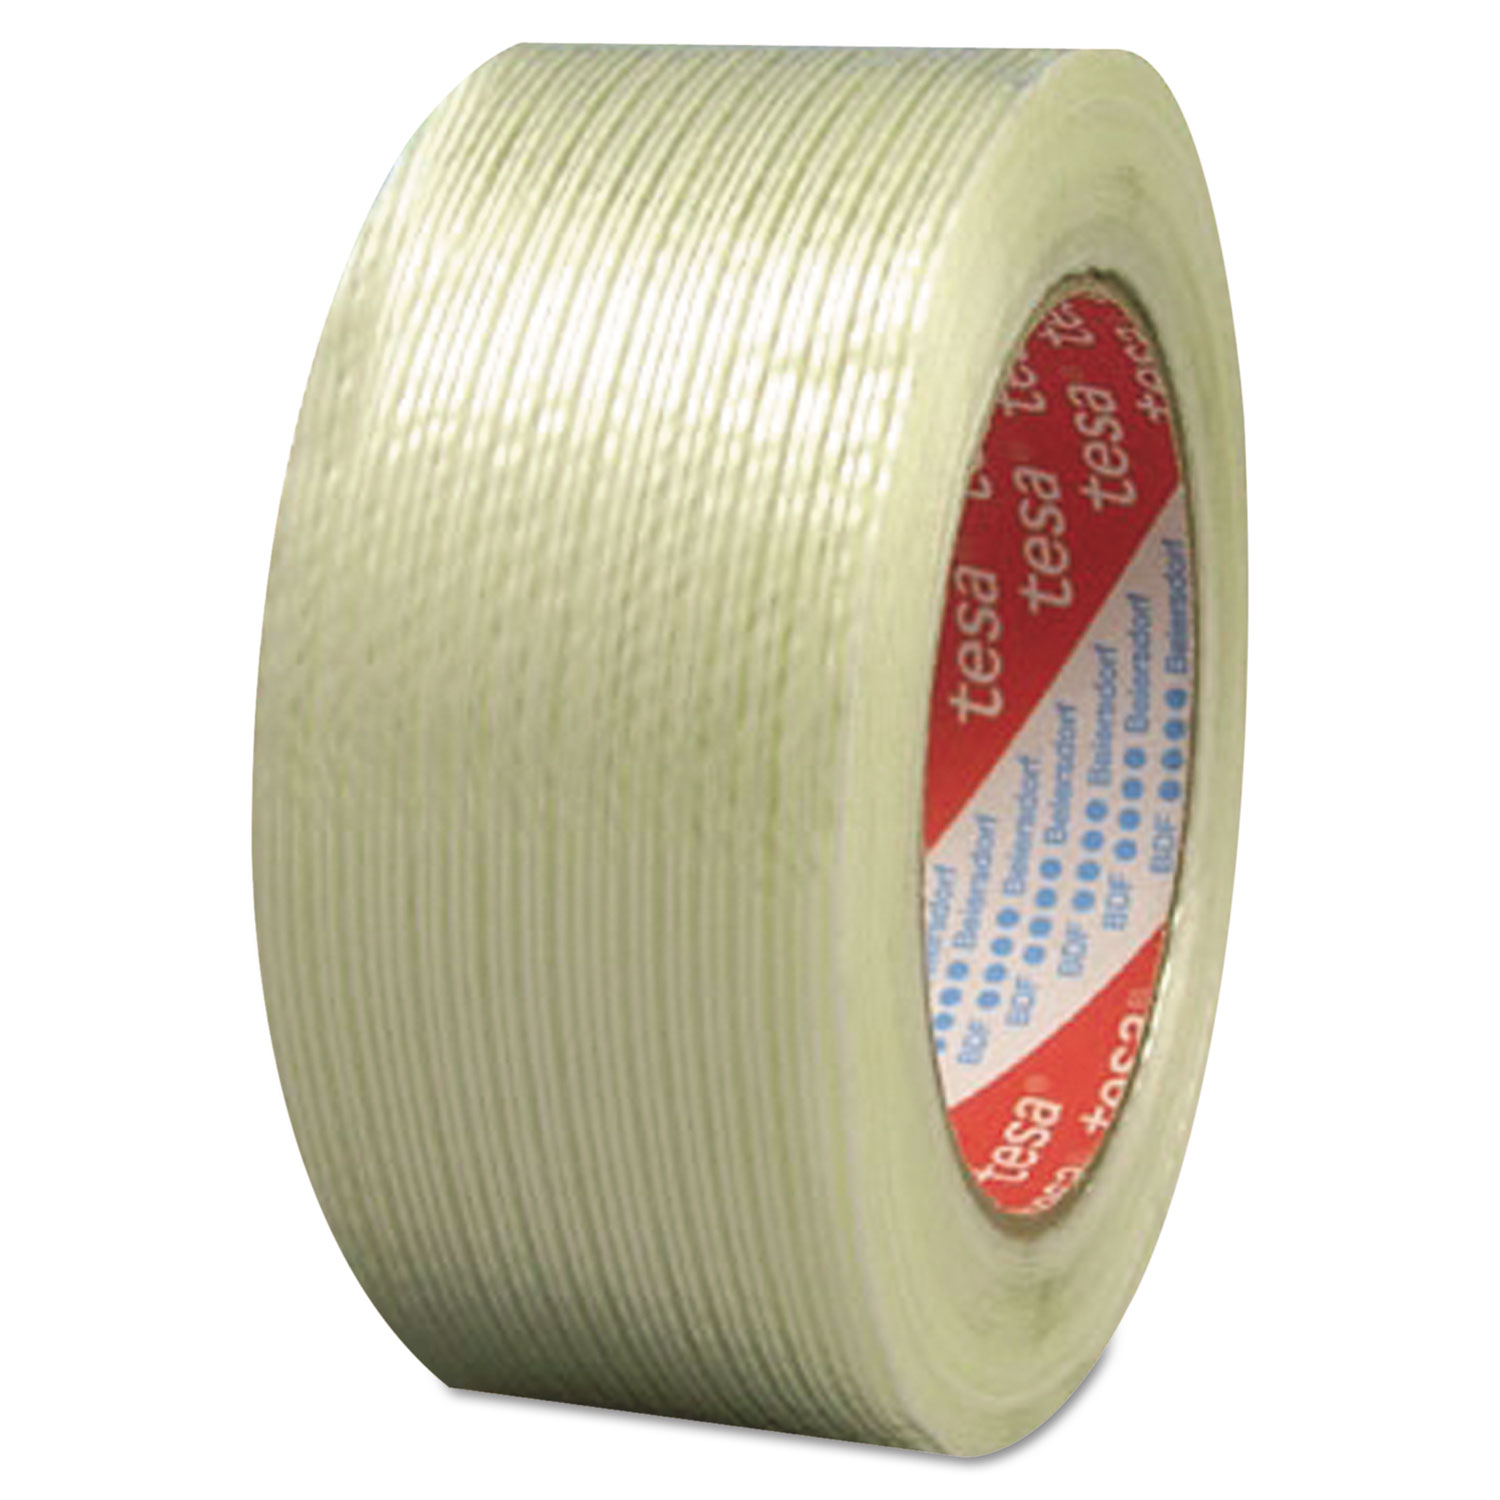 319 Performance Grade Filament Strapping Tape, 3/4